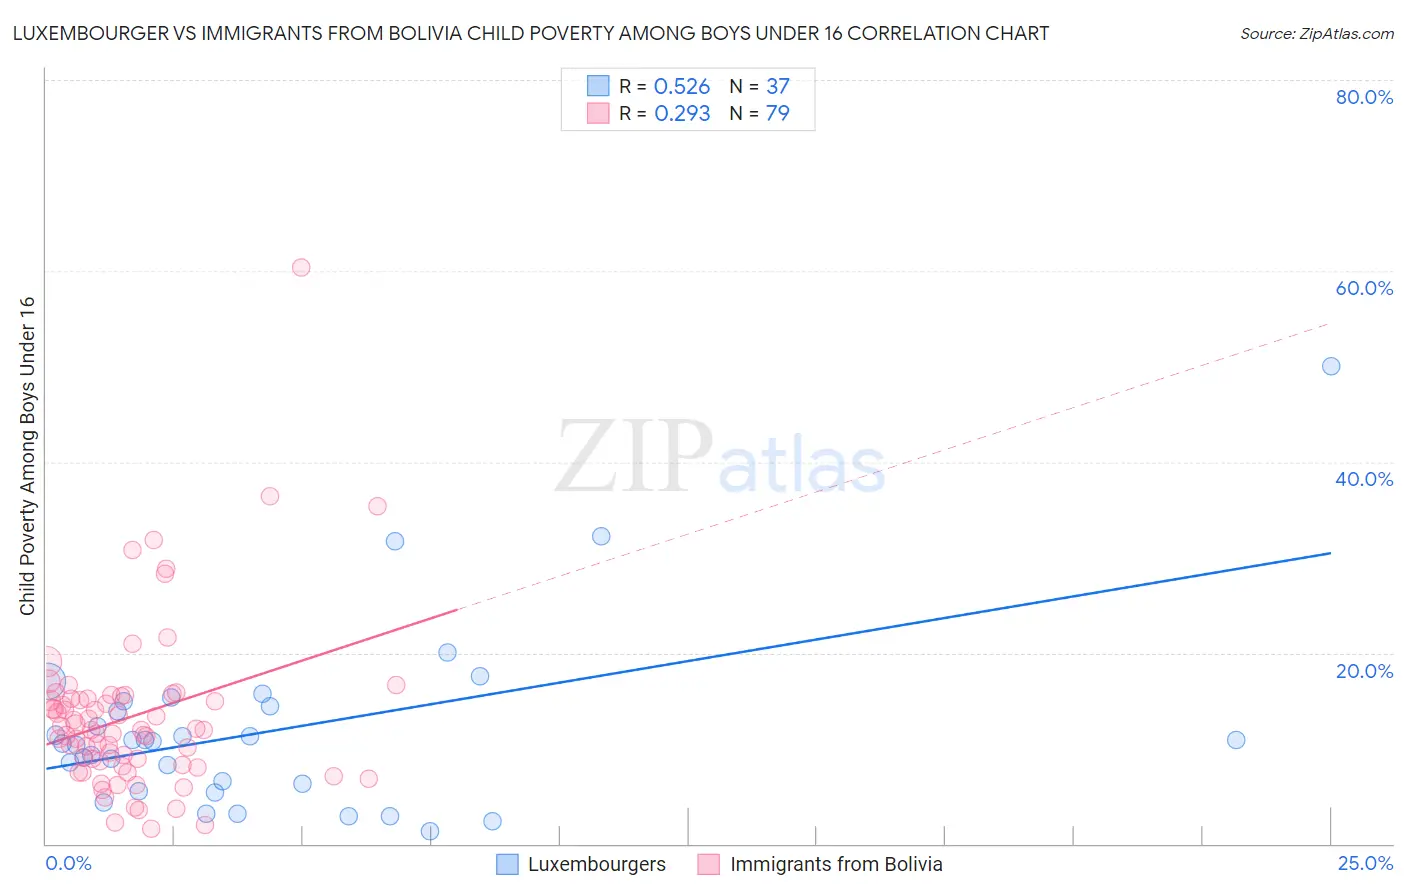 Luxembourger vs Immigrants from Bolivia Child Poverty Among Boys Under 16